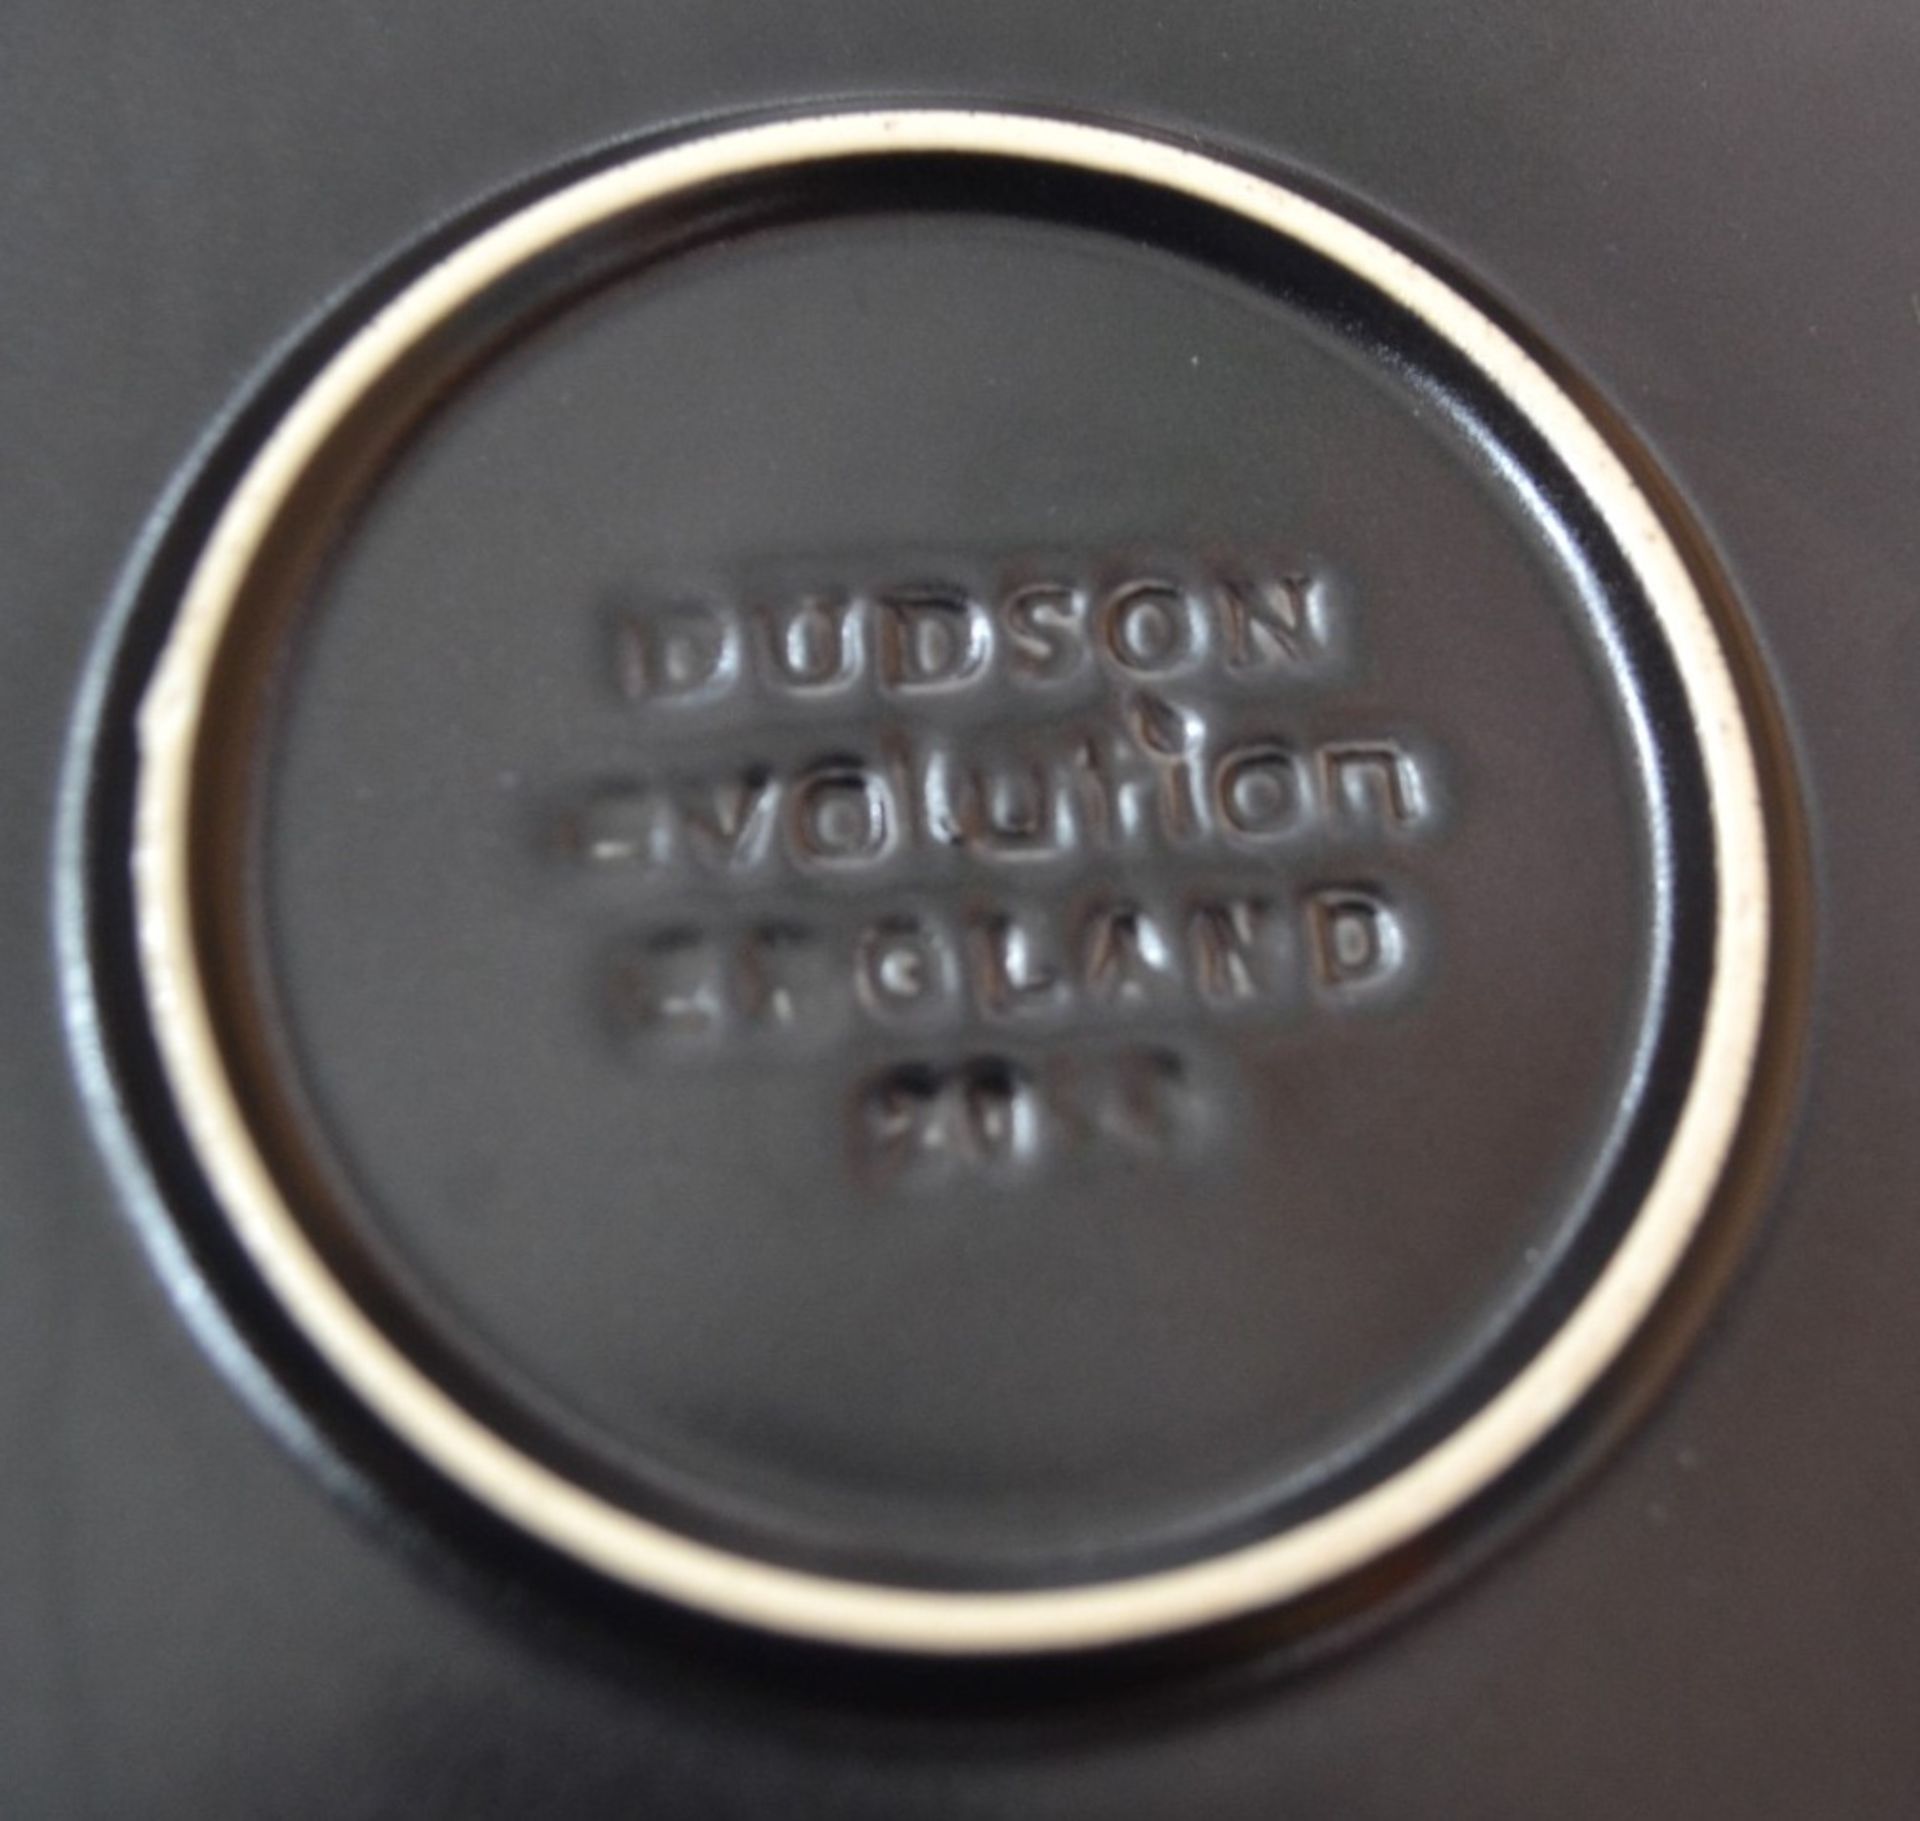 100 x Assorted Pieces of High-end Commercial Crockery In Black - Dudson Evolution / Rustio - Image 7 of 8